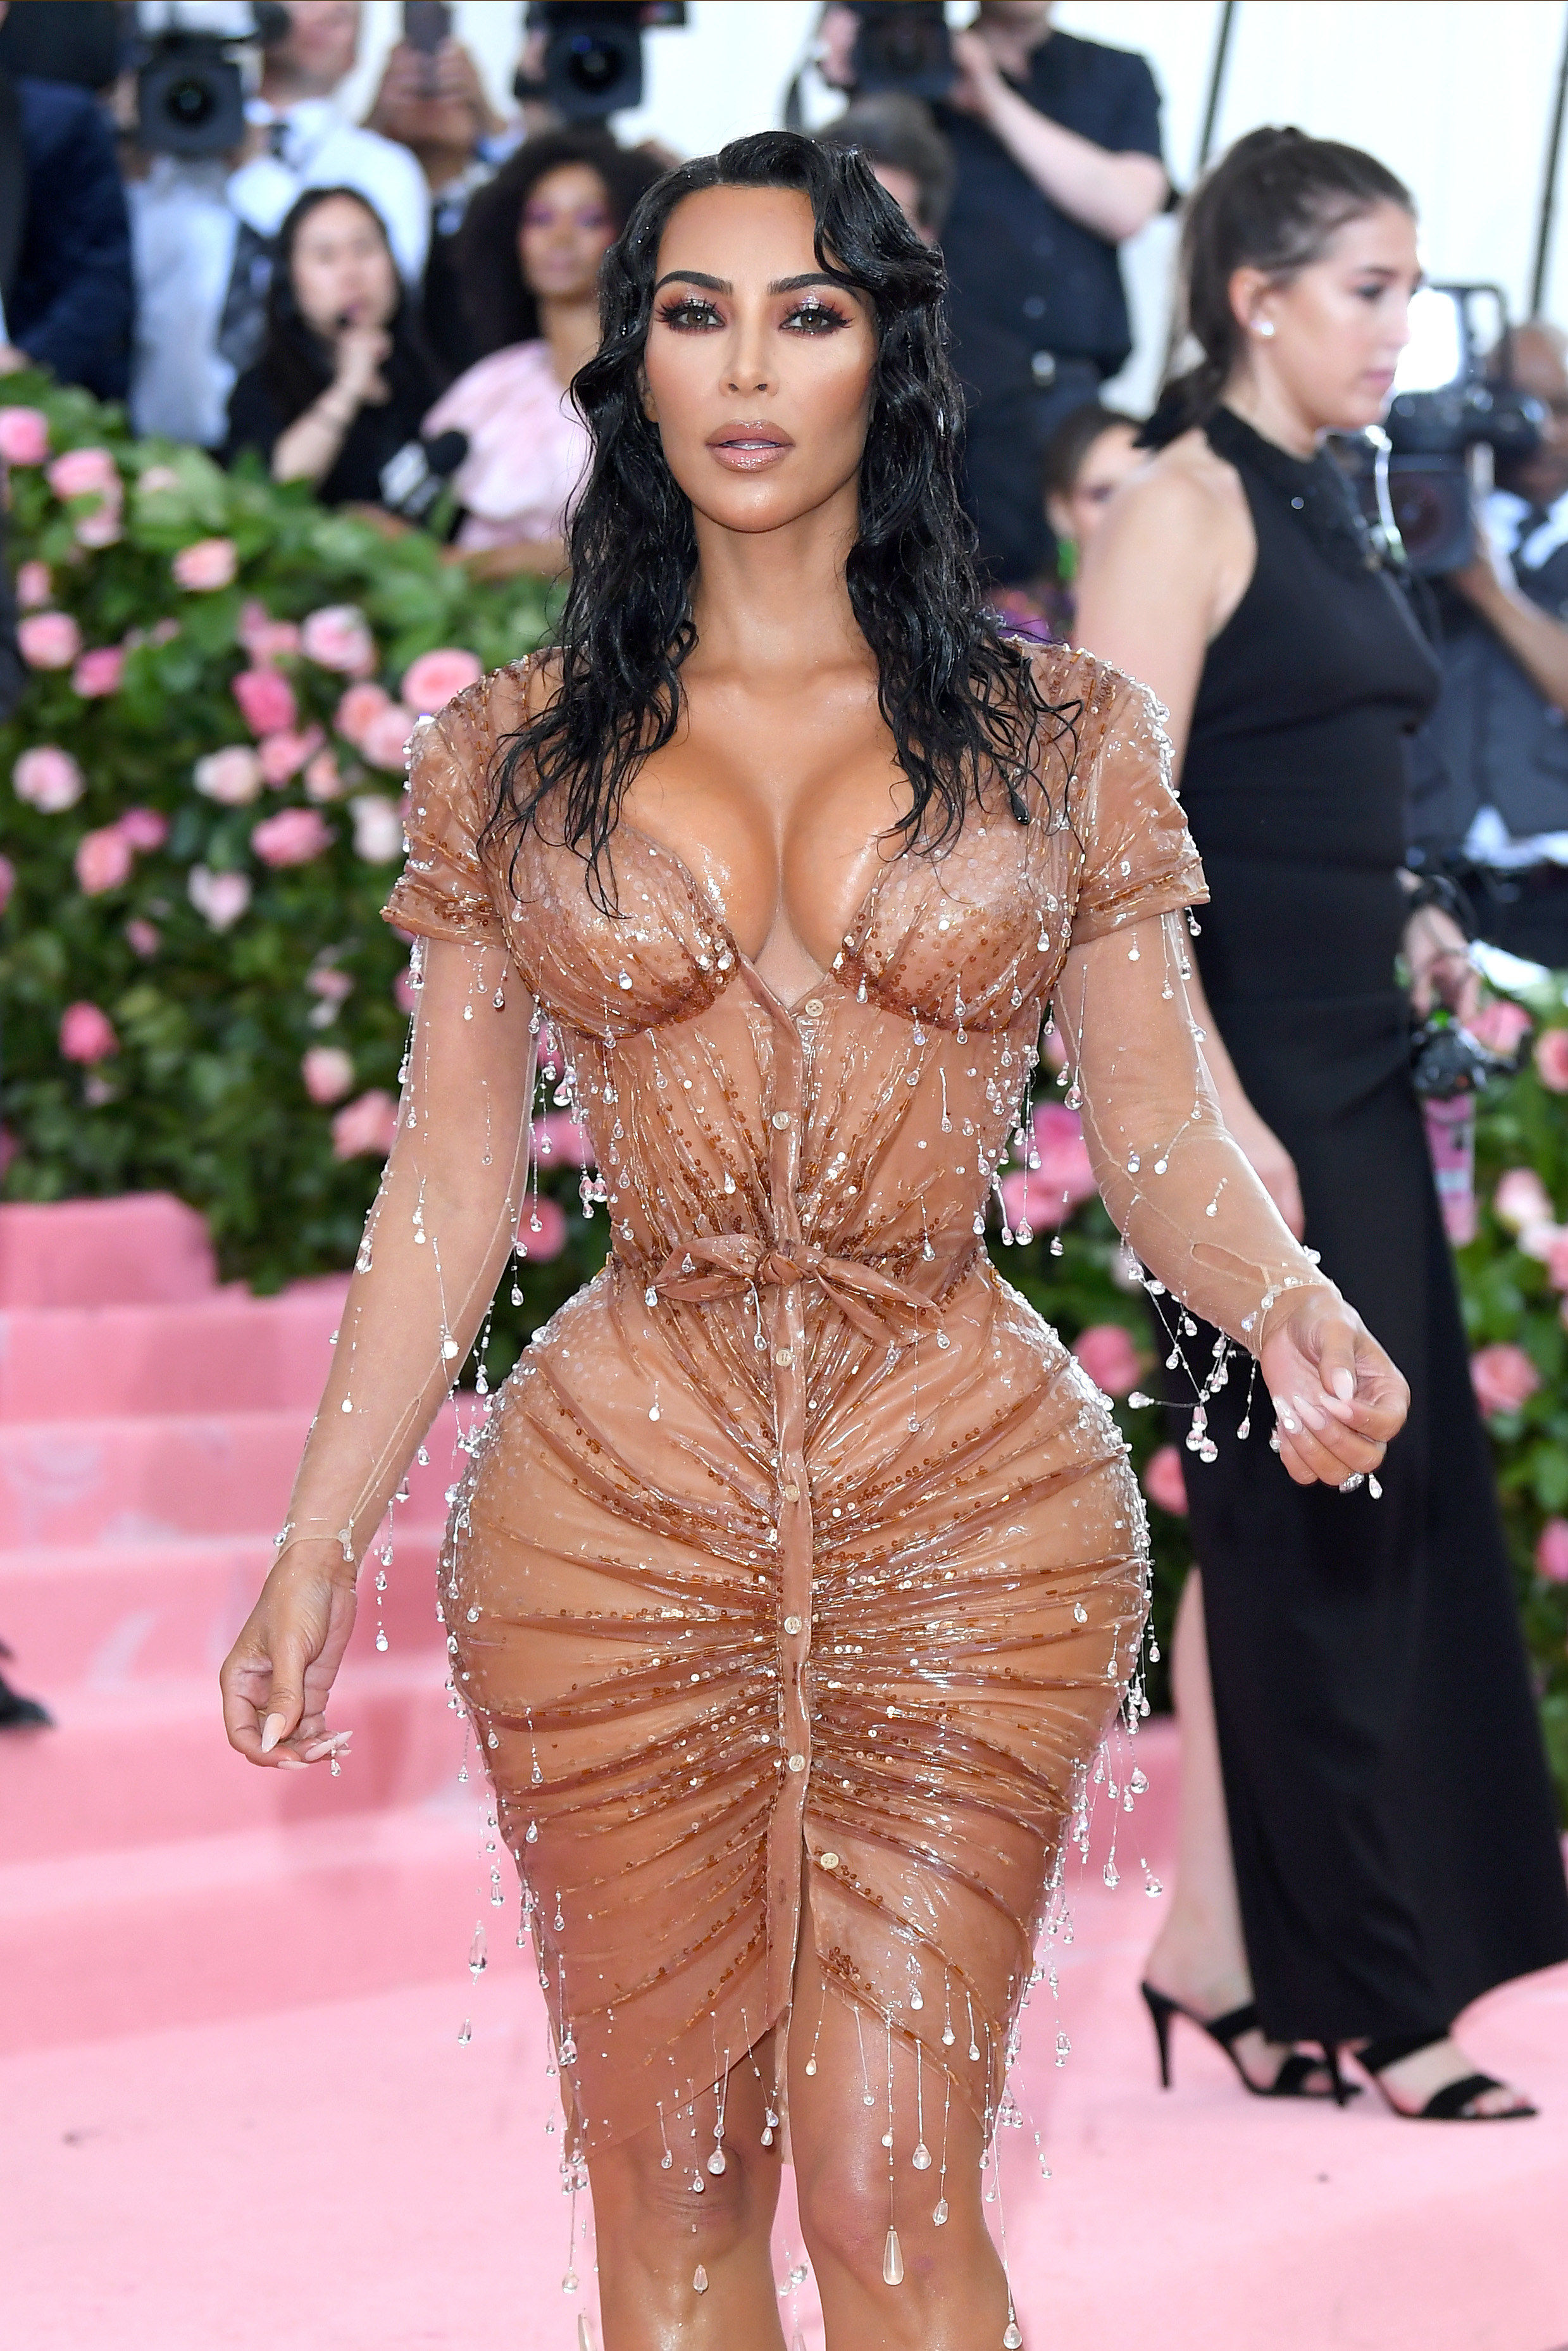 Kim Kardashian arrives for the 2019 Met Gala celebrating Camp: Notes on Fashion at the Metropolitan Museum of Art on May 6, 2019, in New York City